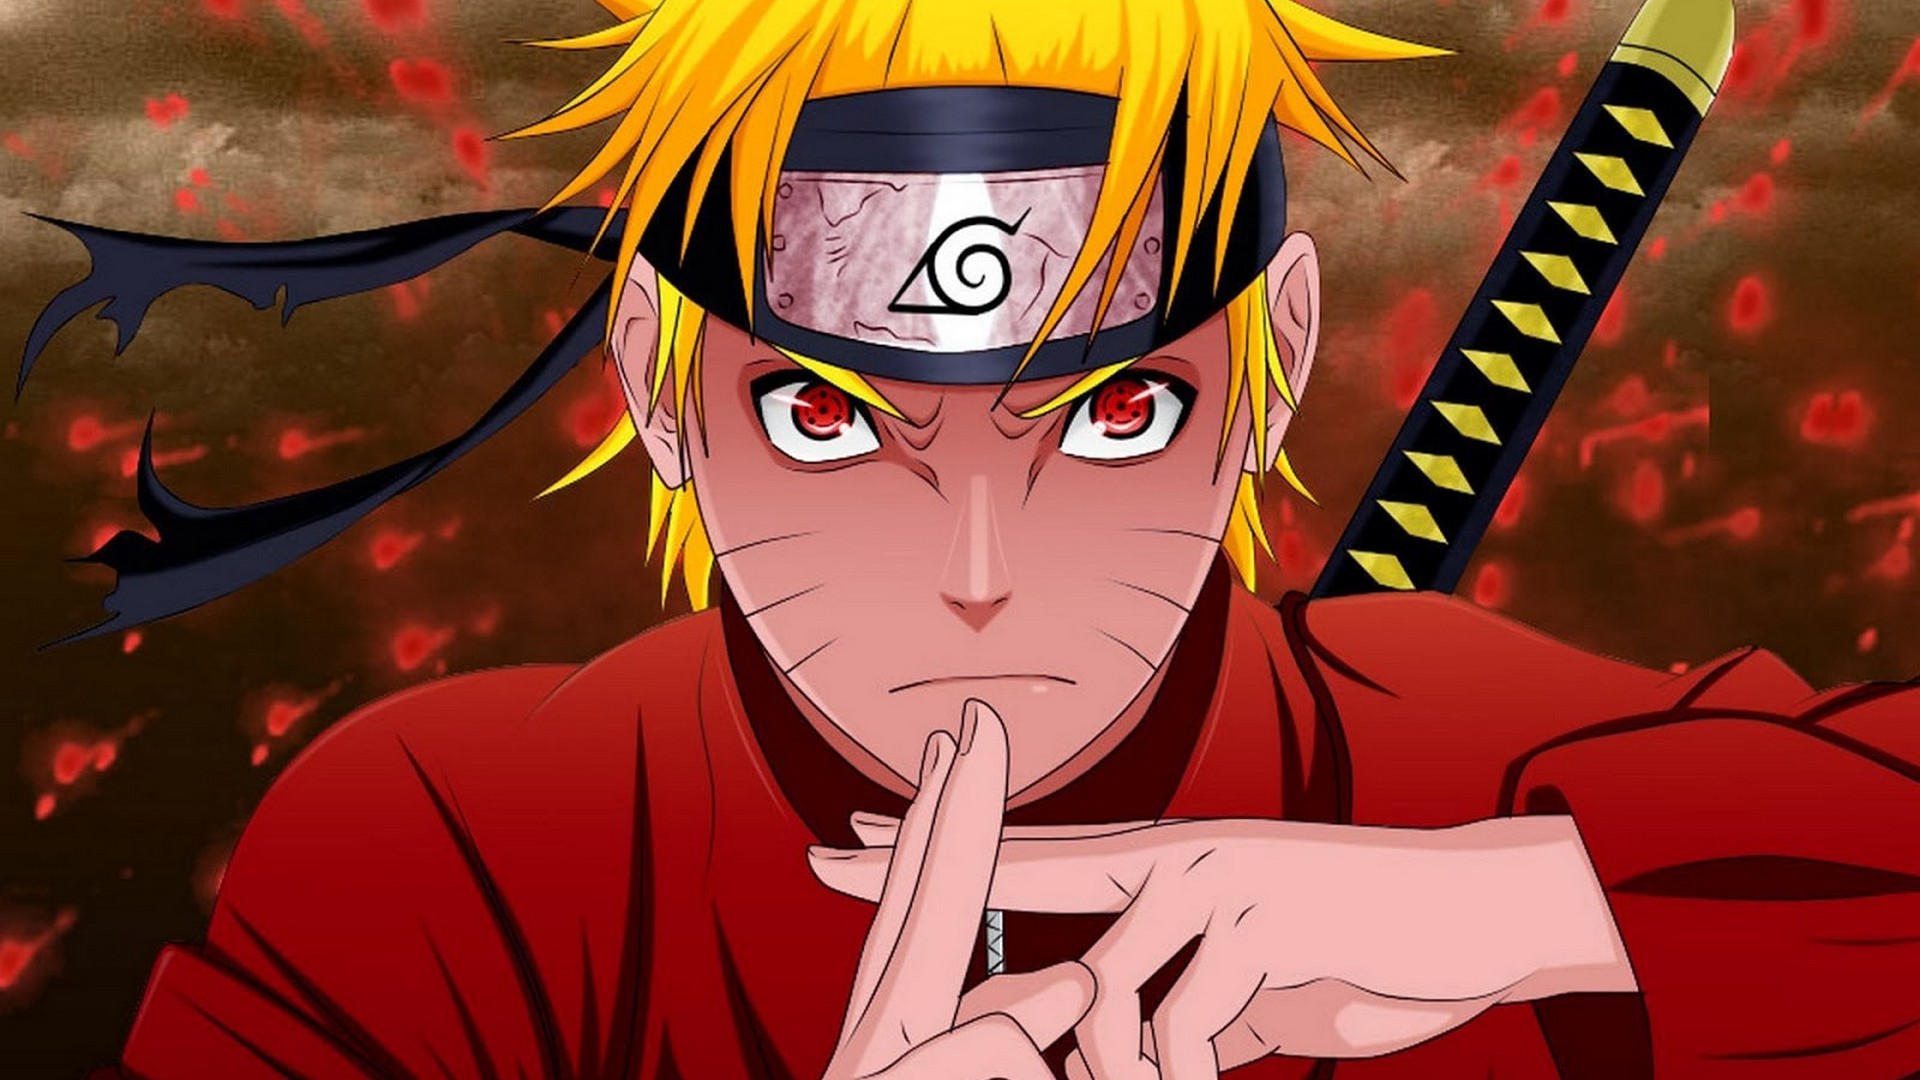 HD Backgrounds Naruto with high-resolution 1920x1080 pixel. You can use this poster wallpaper for your Desktop Computers, Mac Screensavers, Windows Backgrounds, iPhone Wallpapers, Tablet or Android Lock screen and another Mobile device